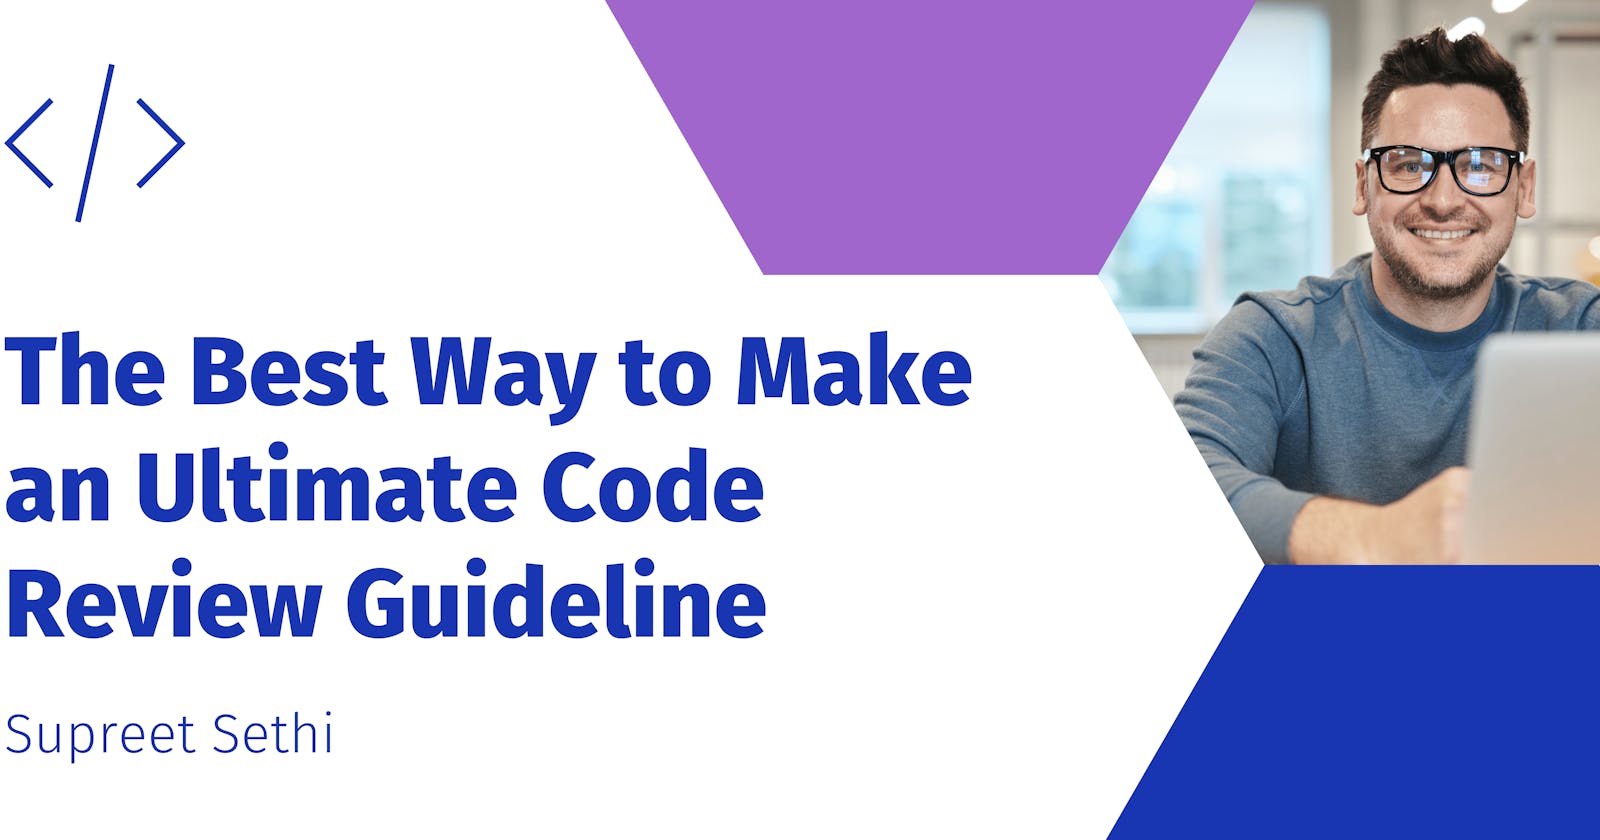 The Best Way to Make an Ultimate Code Review Guideline